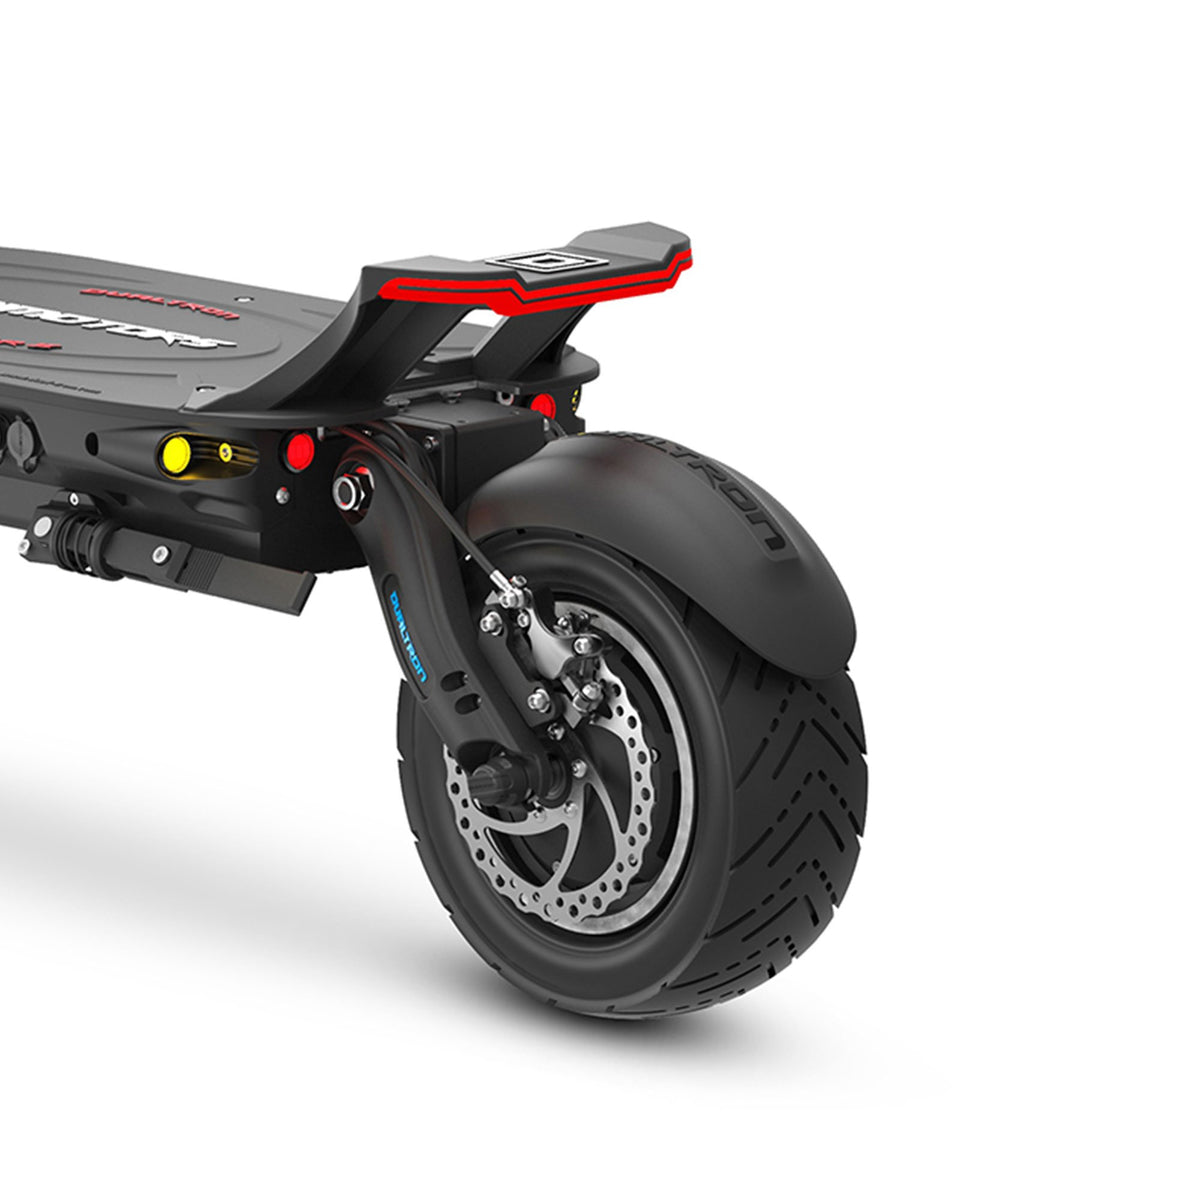 DUALTRON THUNDER 2 Electric Scooter-Electric Scooters London